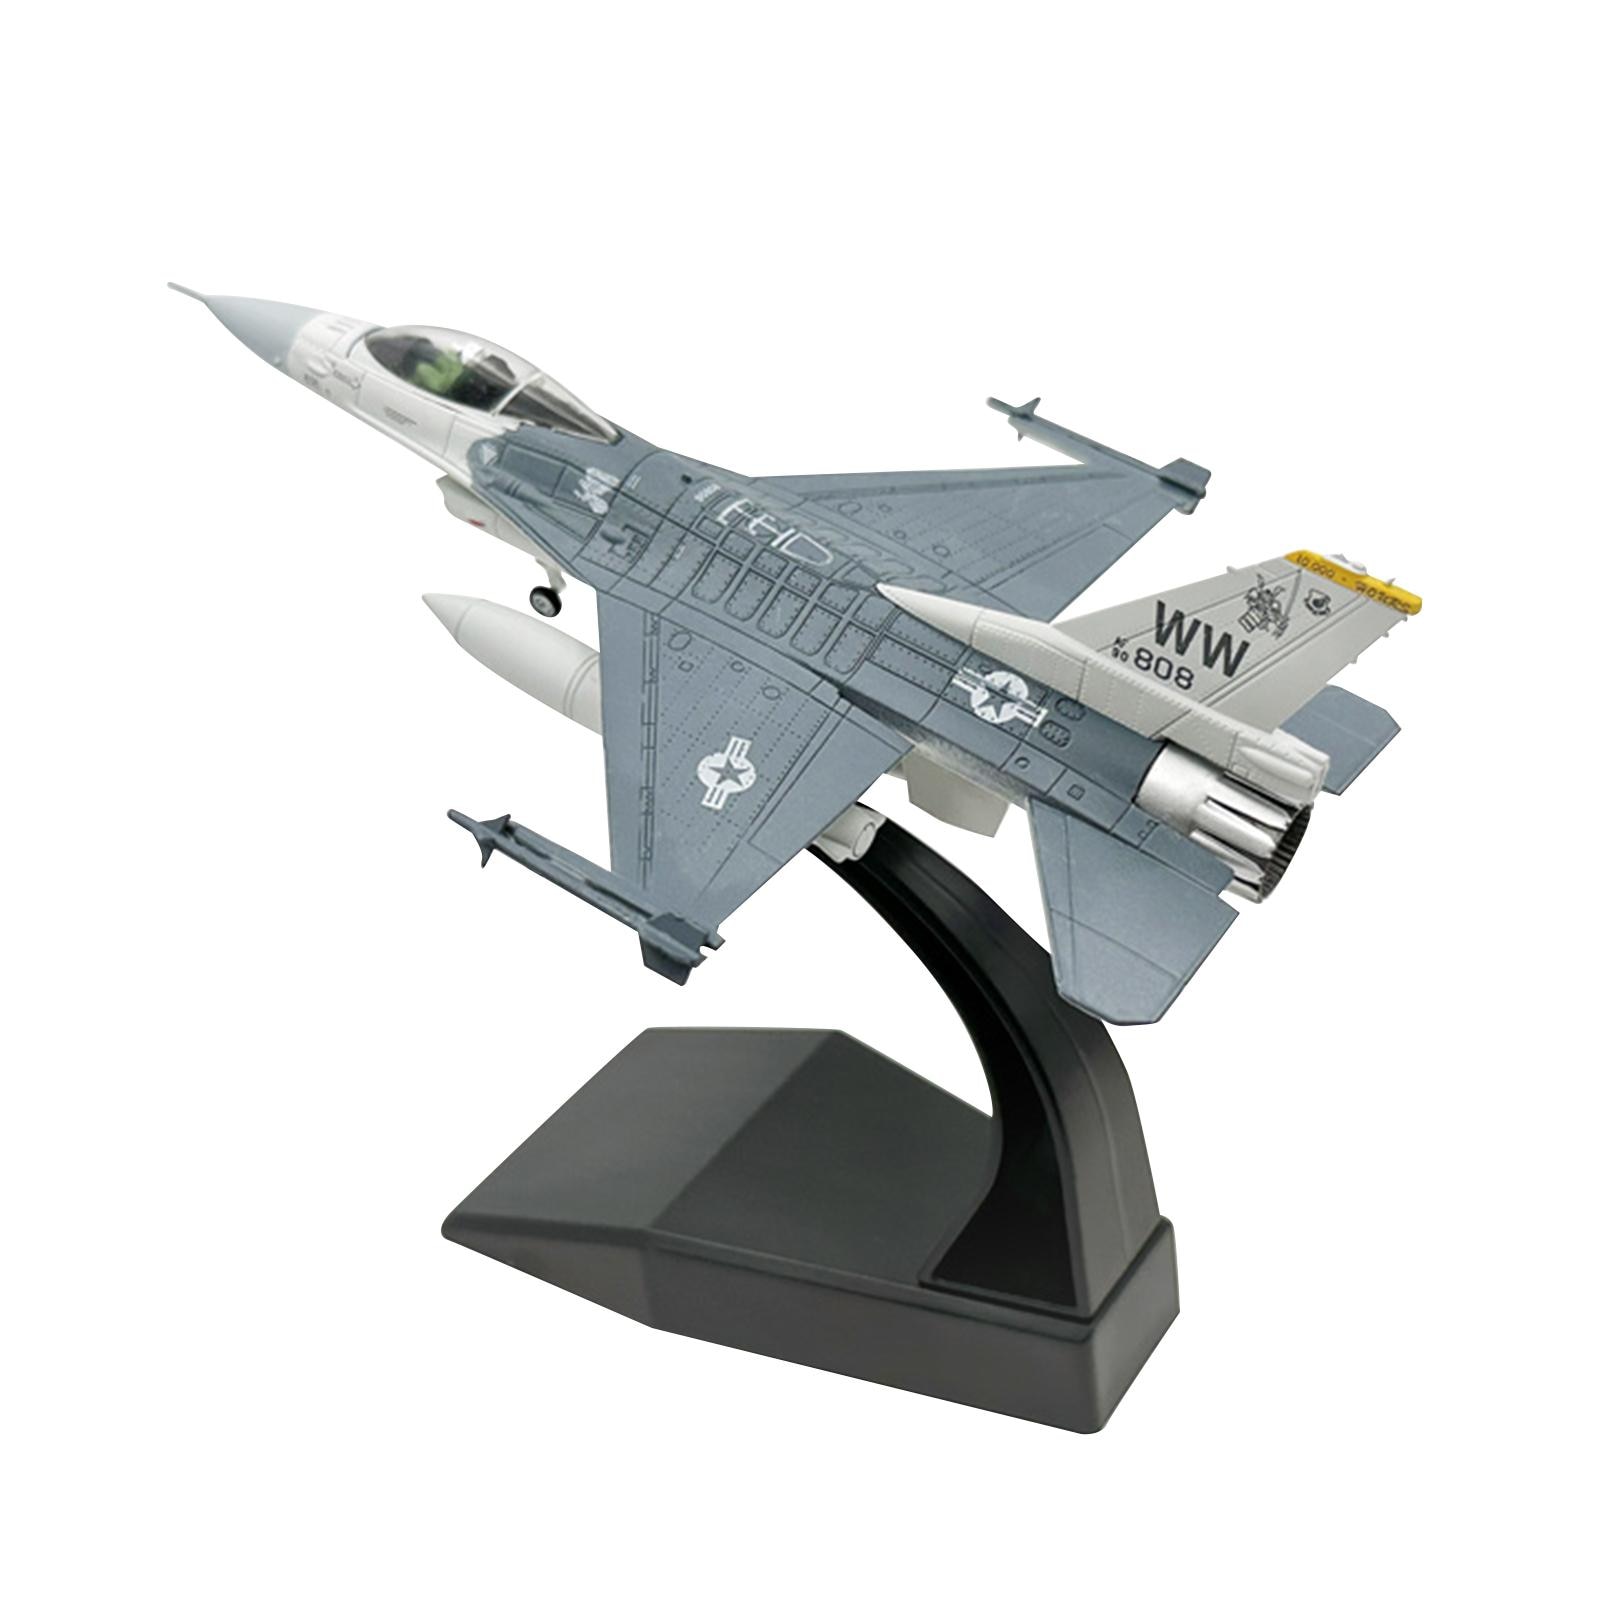 1/100 Scale F16C Fighter Simulation Ks Toys Diecast Alloy Model Aircraft Ornament Airplane for Bar Cafe Office Bookshelf Home